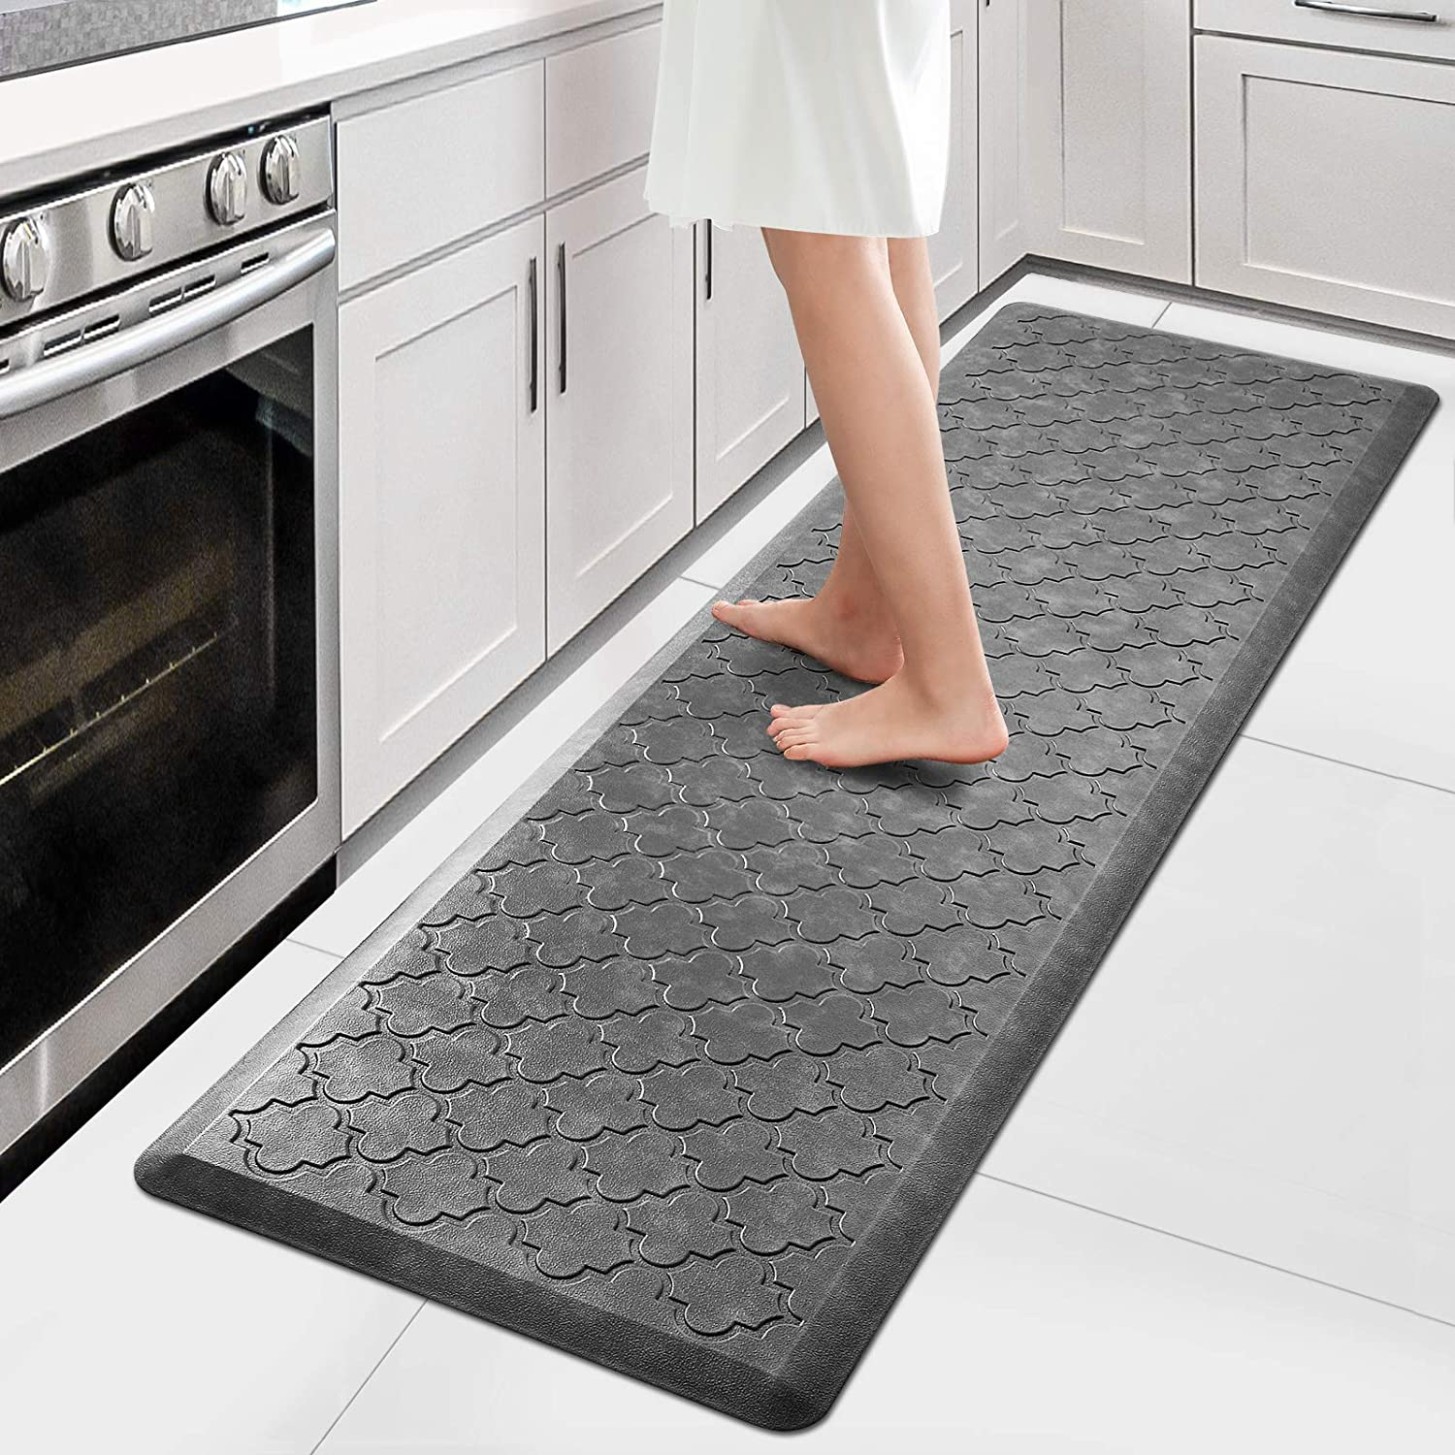 WISELIFE Kitchen Mat Cushioned Anti Fatigue Floor Mat,5